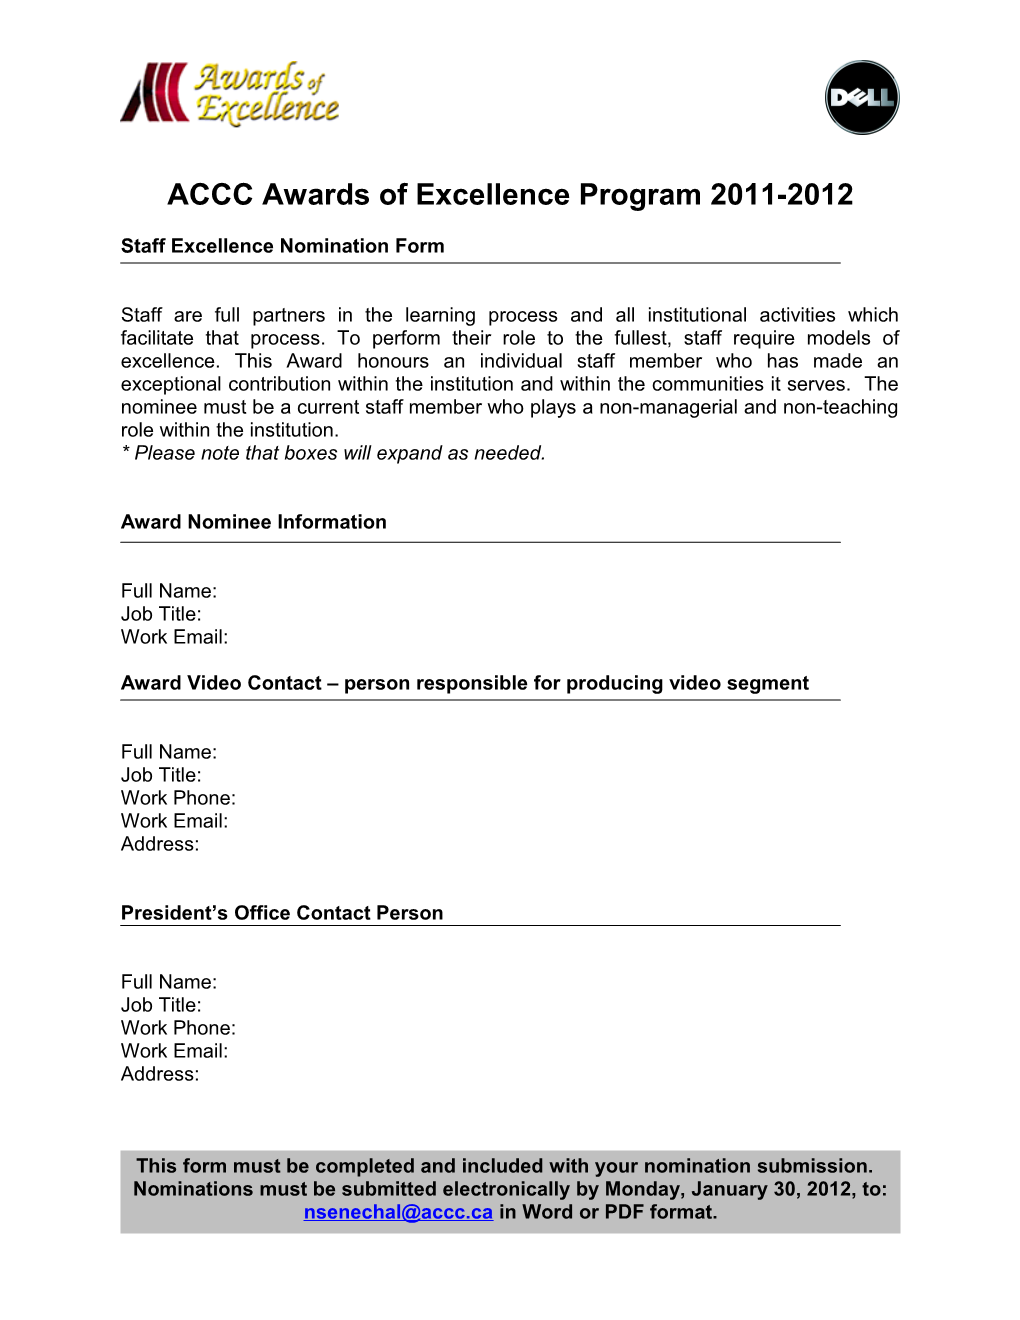 ACCC Awards of Excellence Program 2009-2010